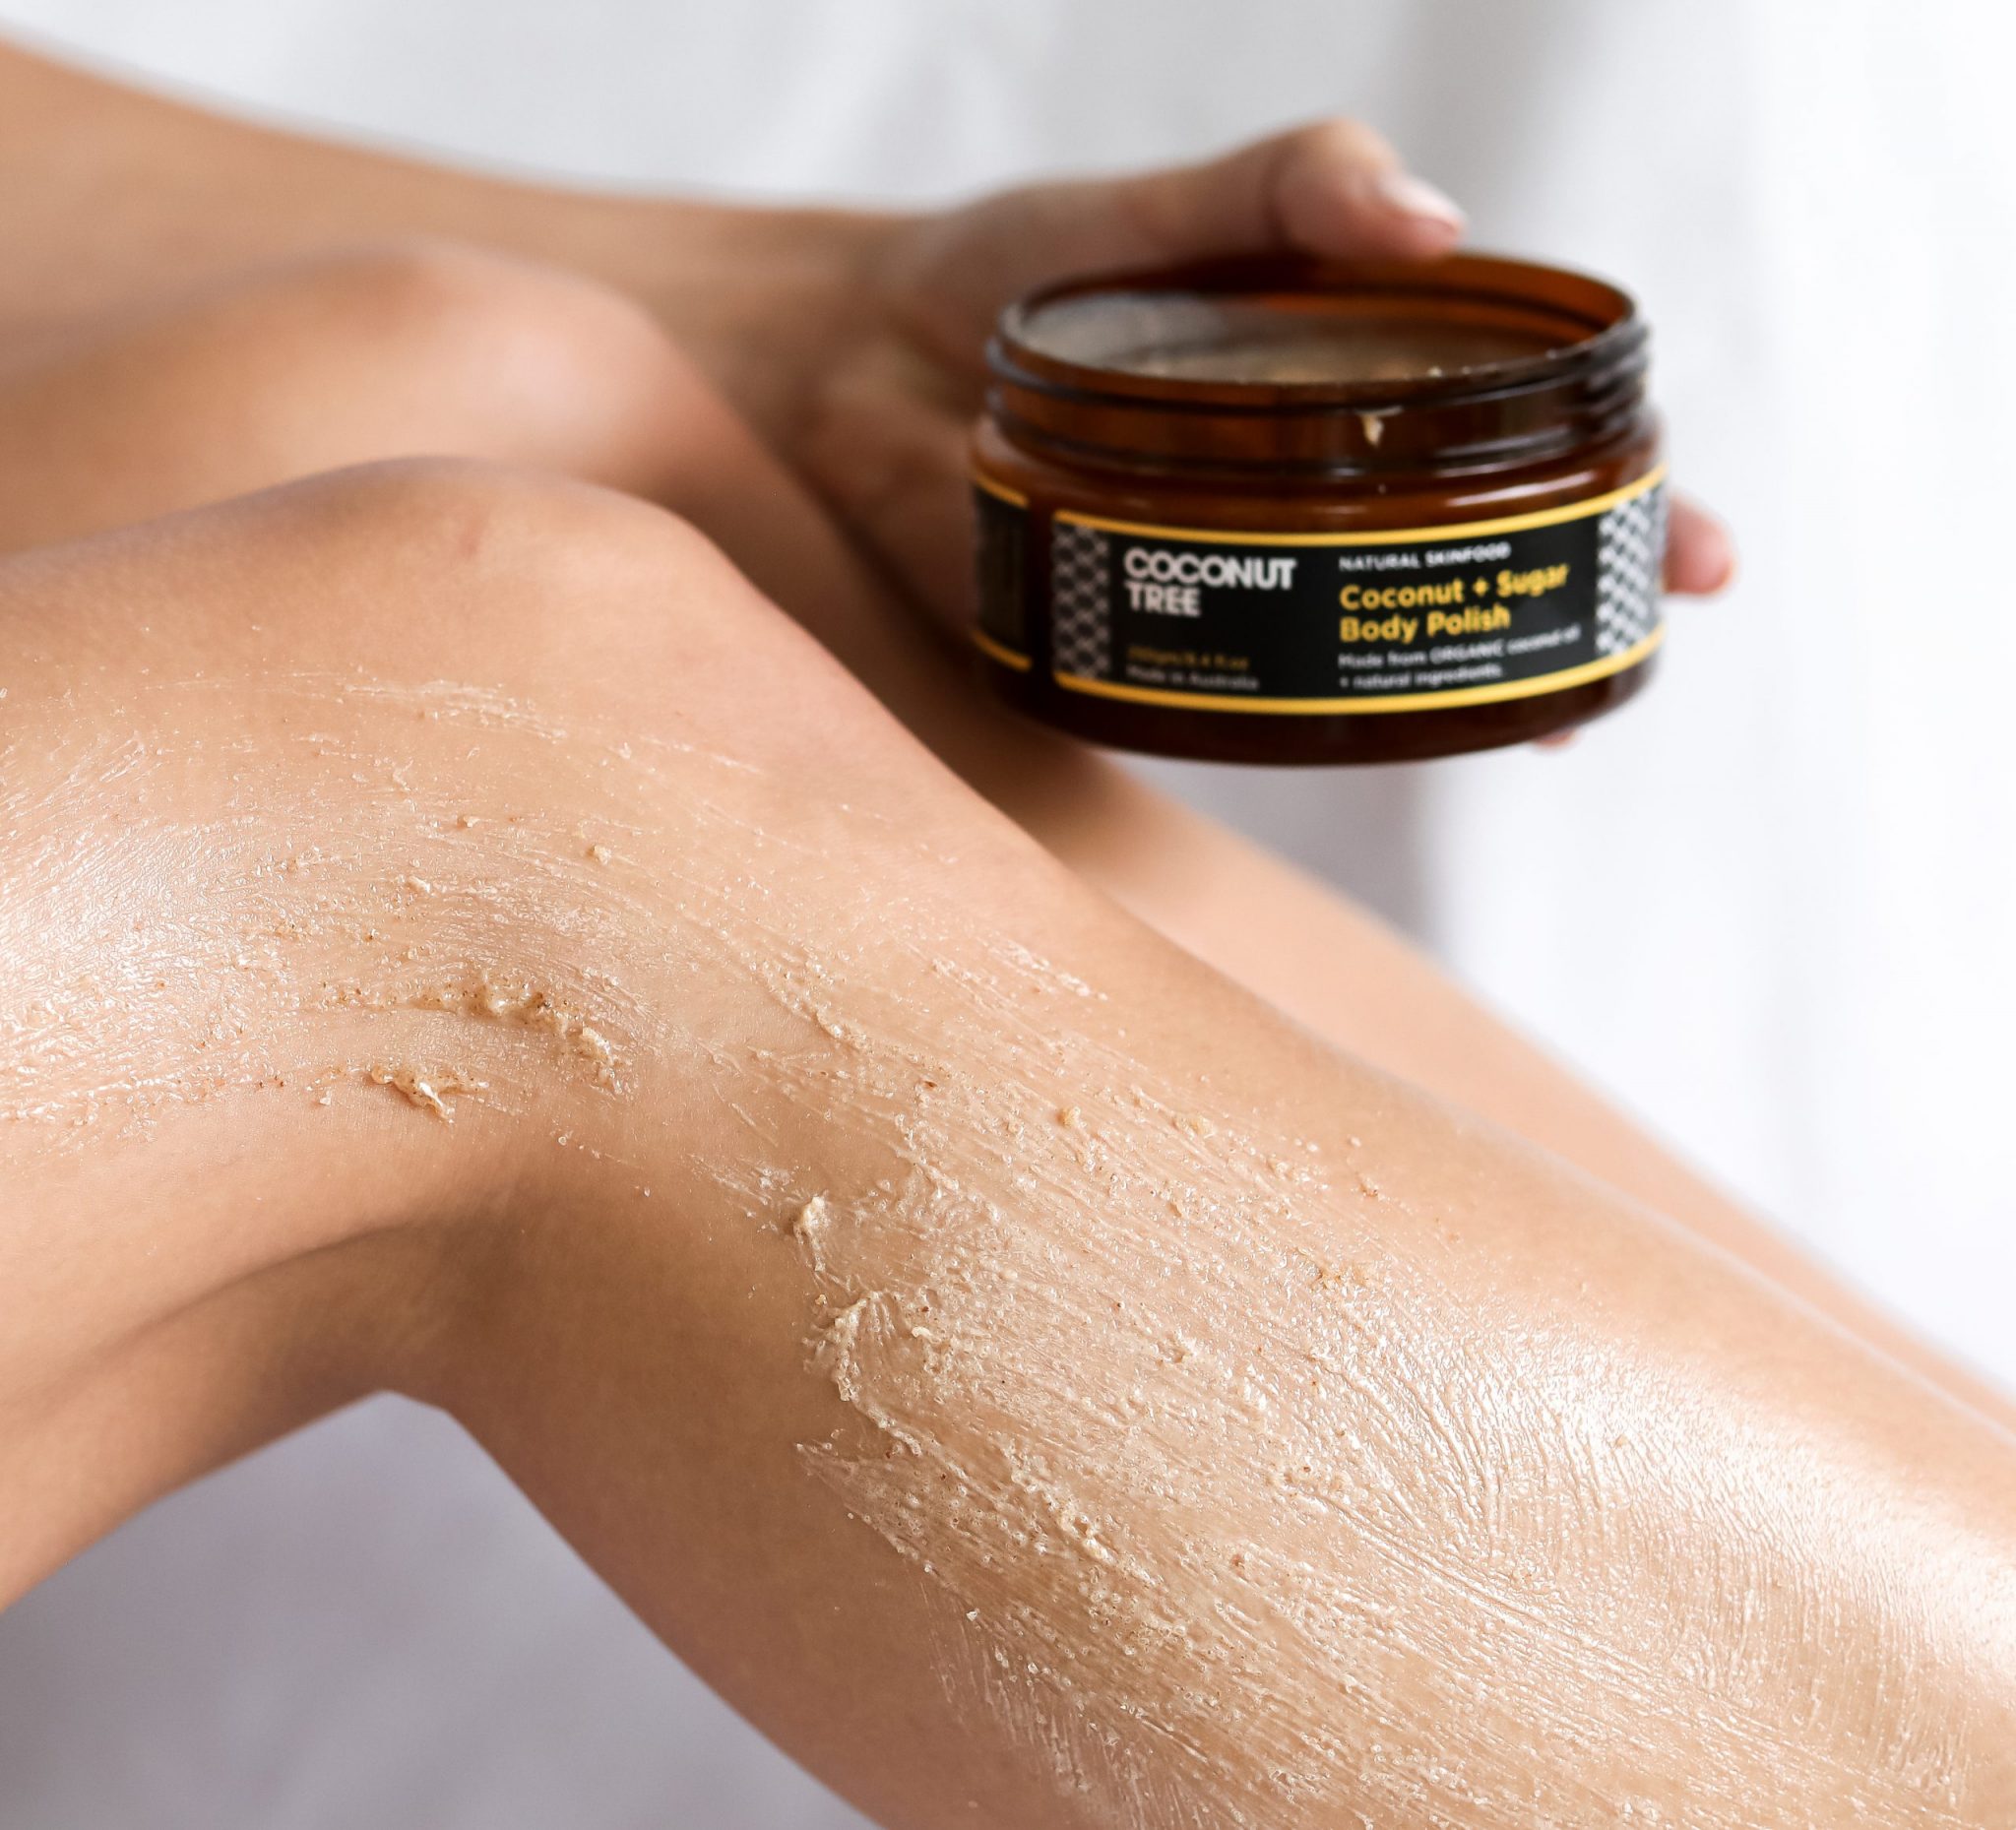 HOW & WHY TO USE A BODY SCRUB